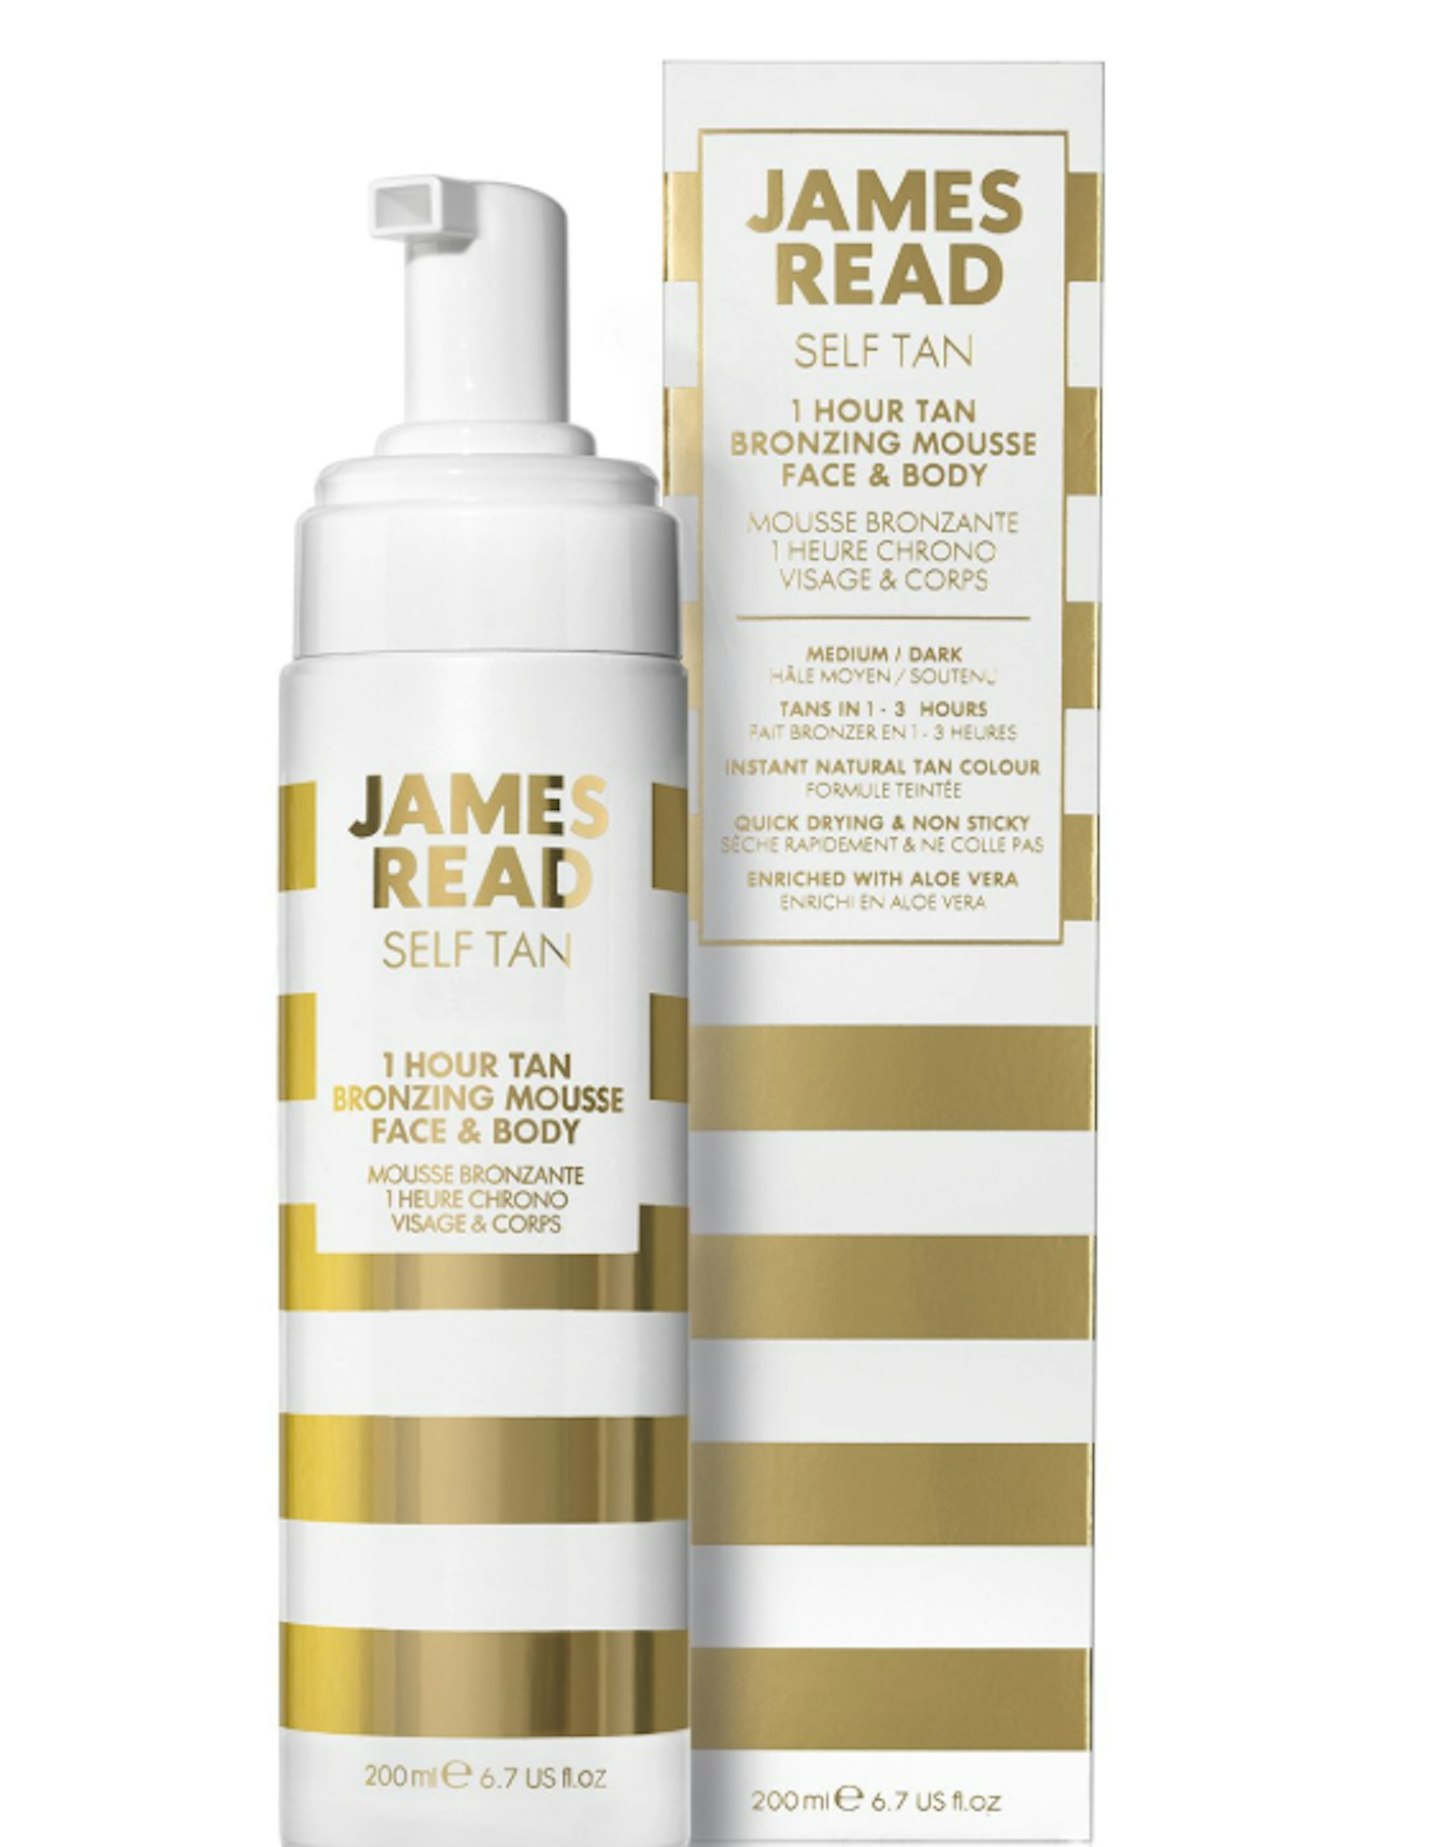 JAMES READ 1 Hour Express Bronzing Mousse for Face & Body 200ml, Amazon